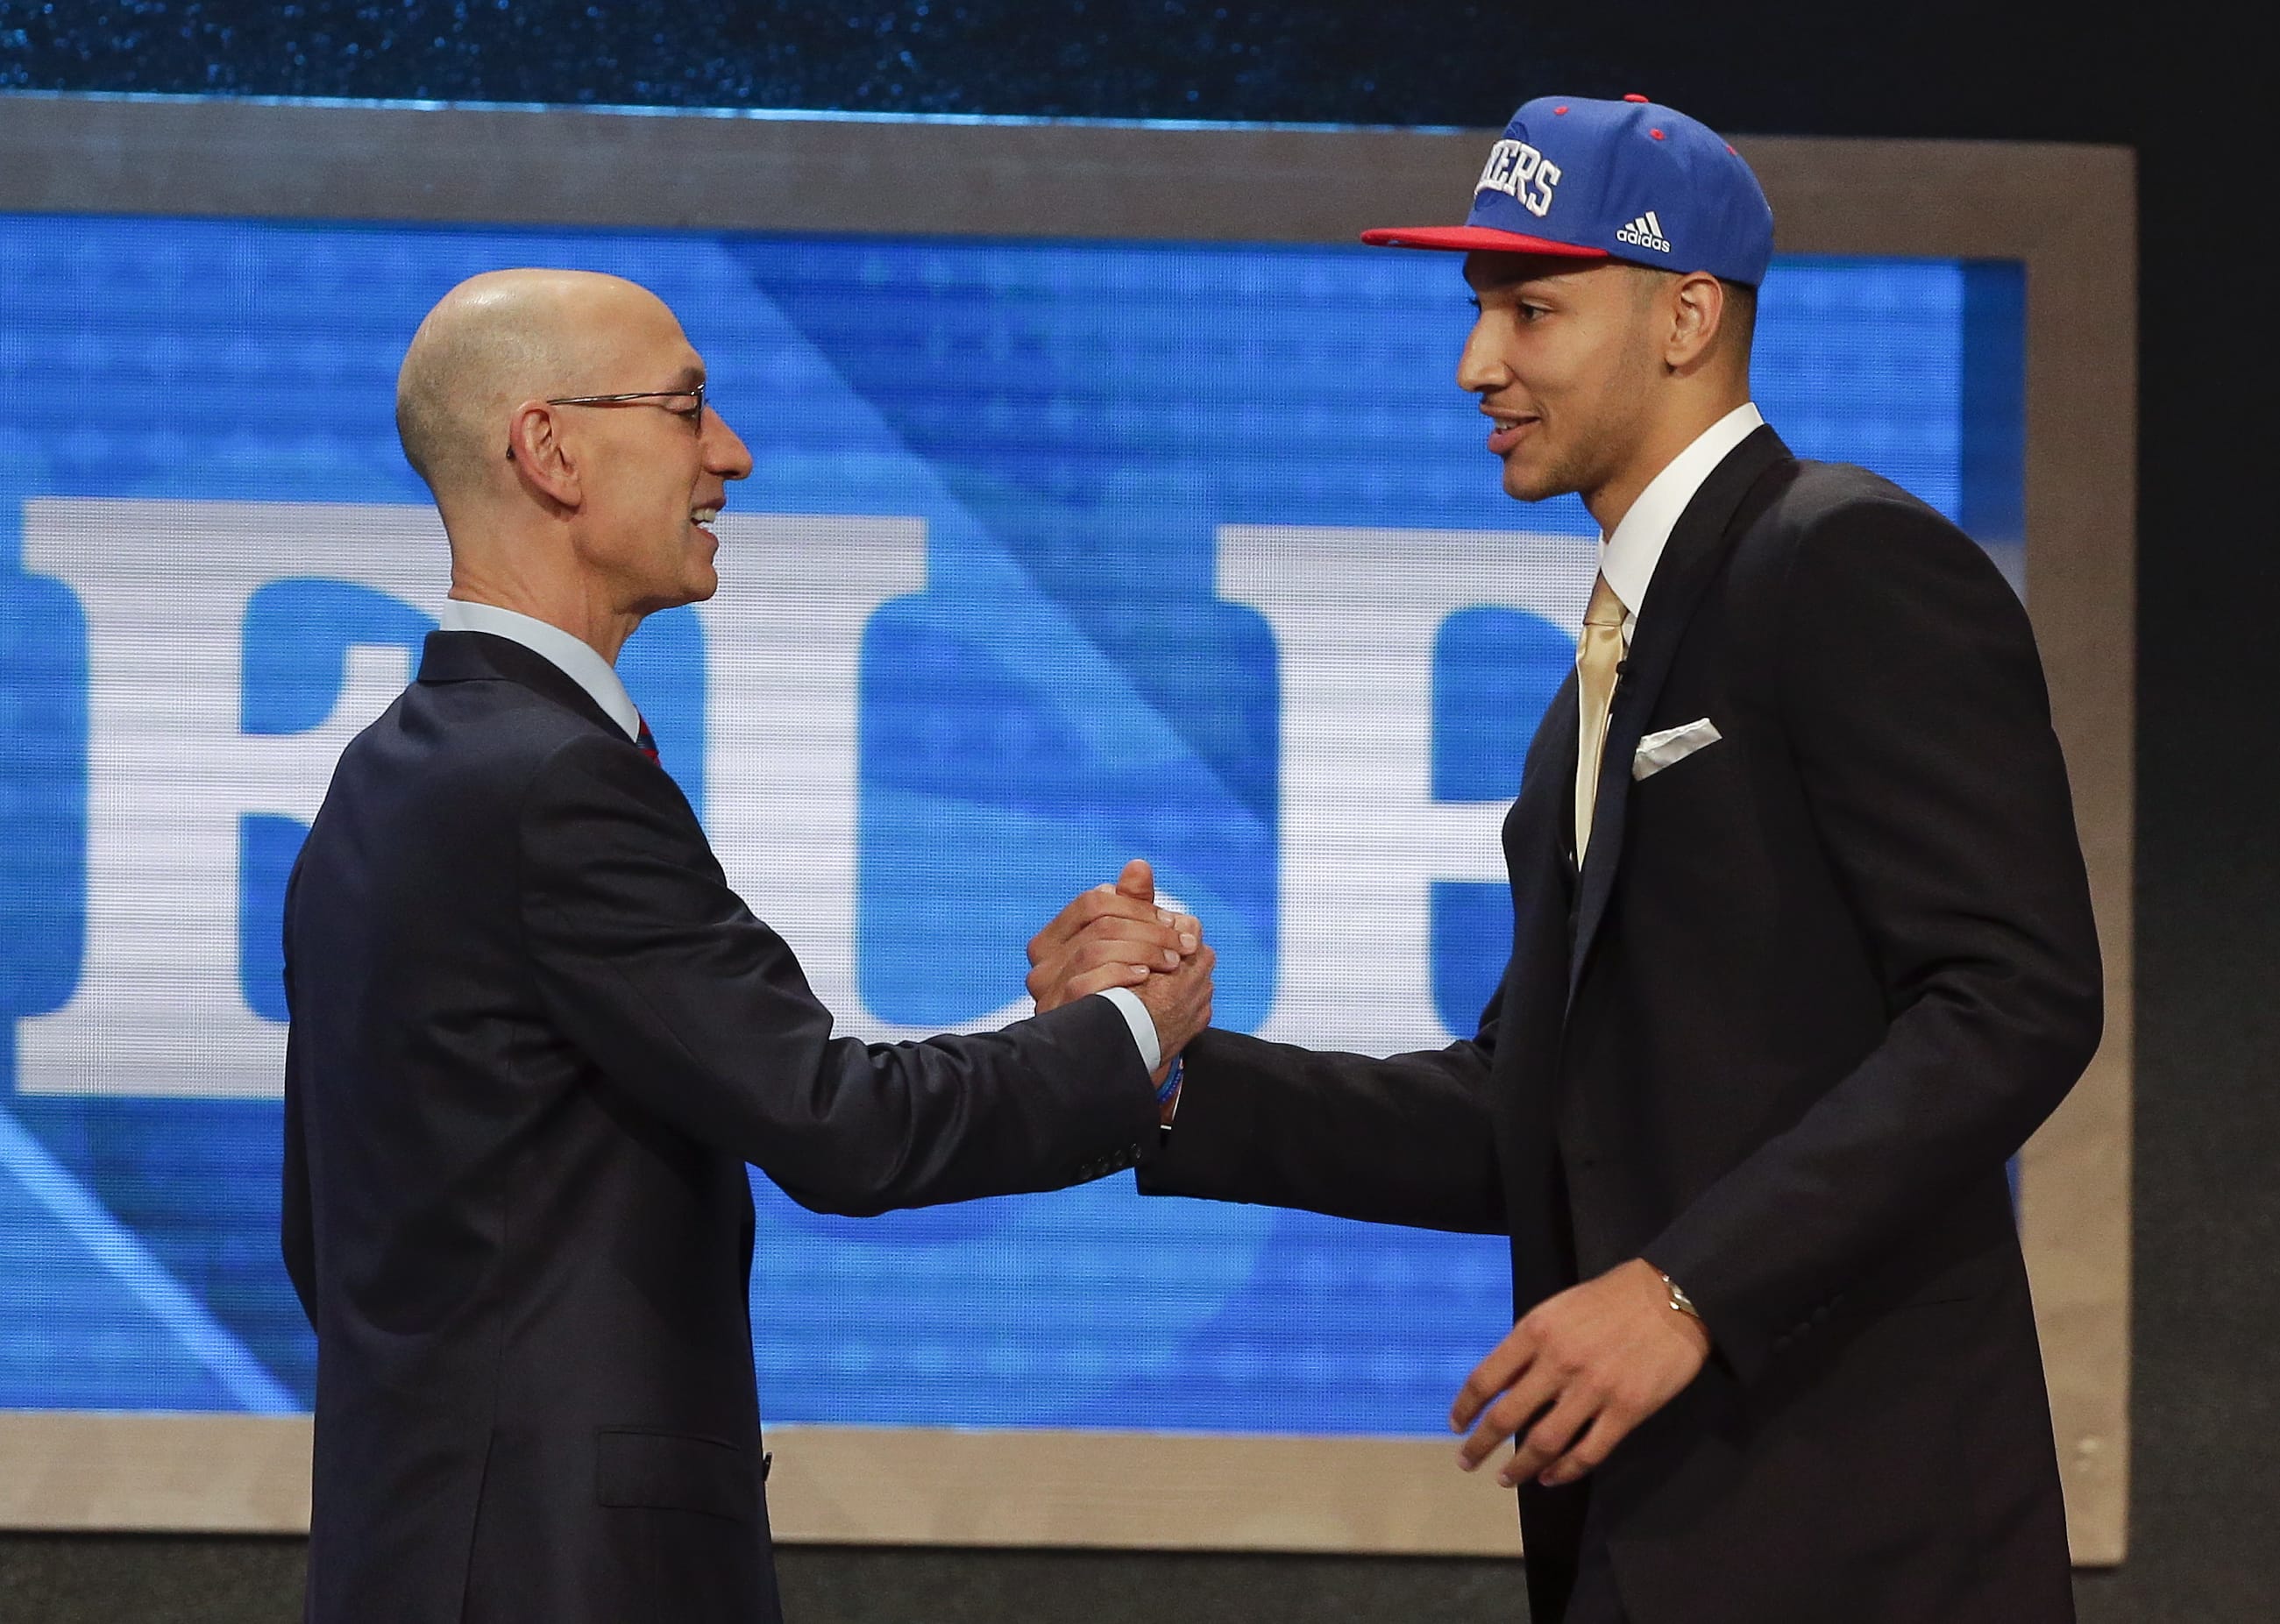 NBA Commissioner Adam Silver, left, greets Ben Simmons after announcing him as the top pick by the Philadelphia 76ers during the NBA basketball draft, Thursday, June 23, 2016, in New York.